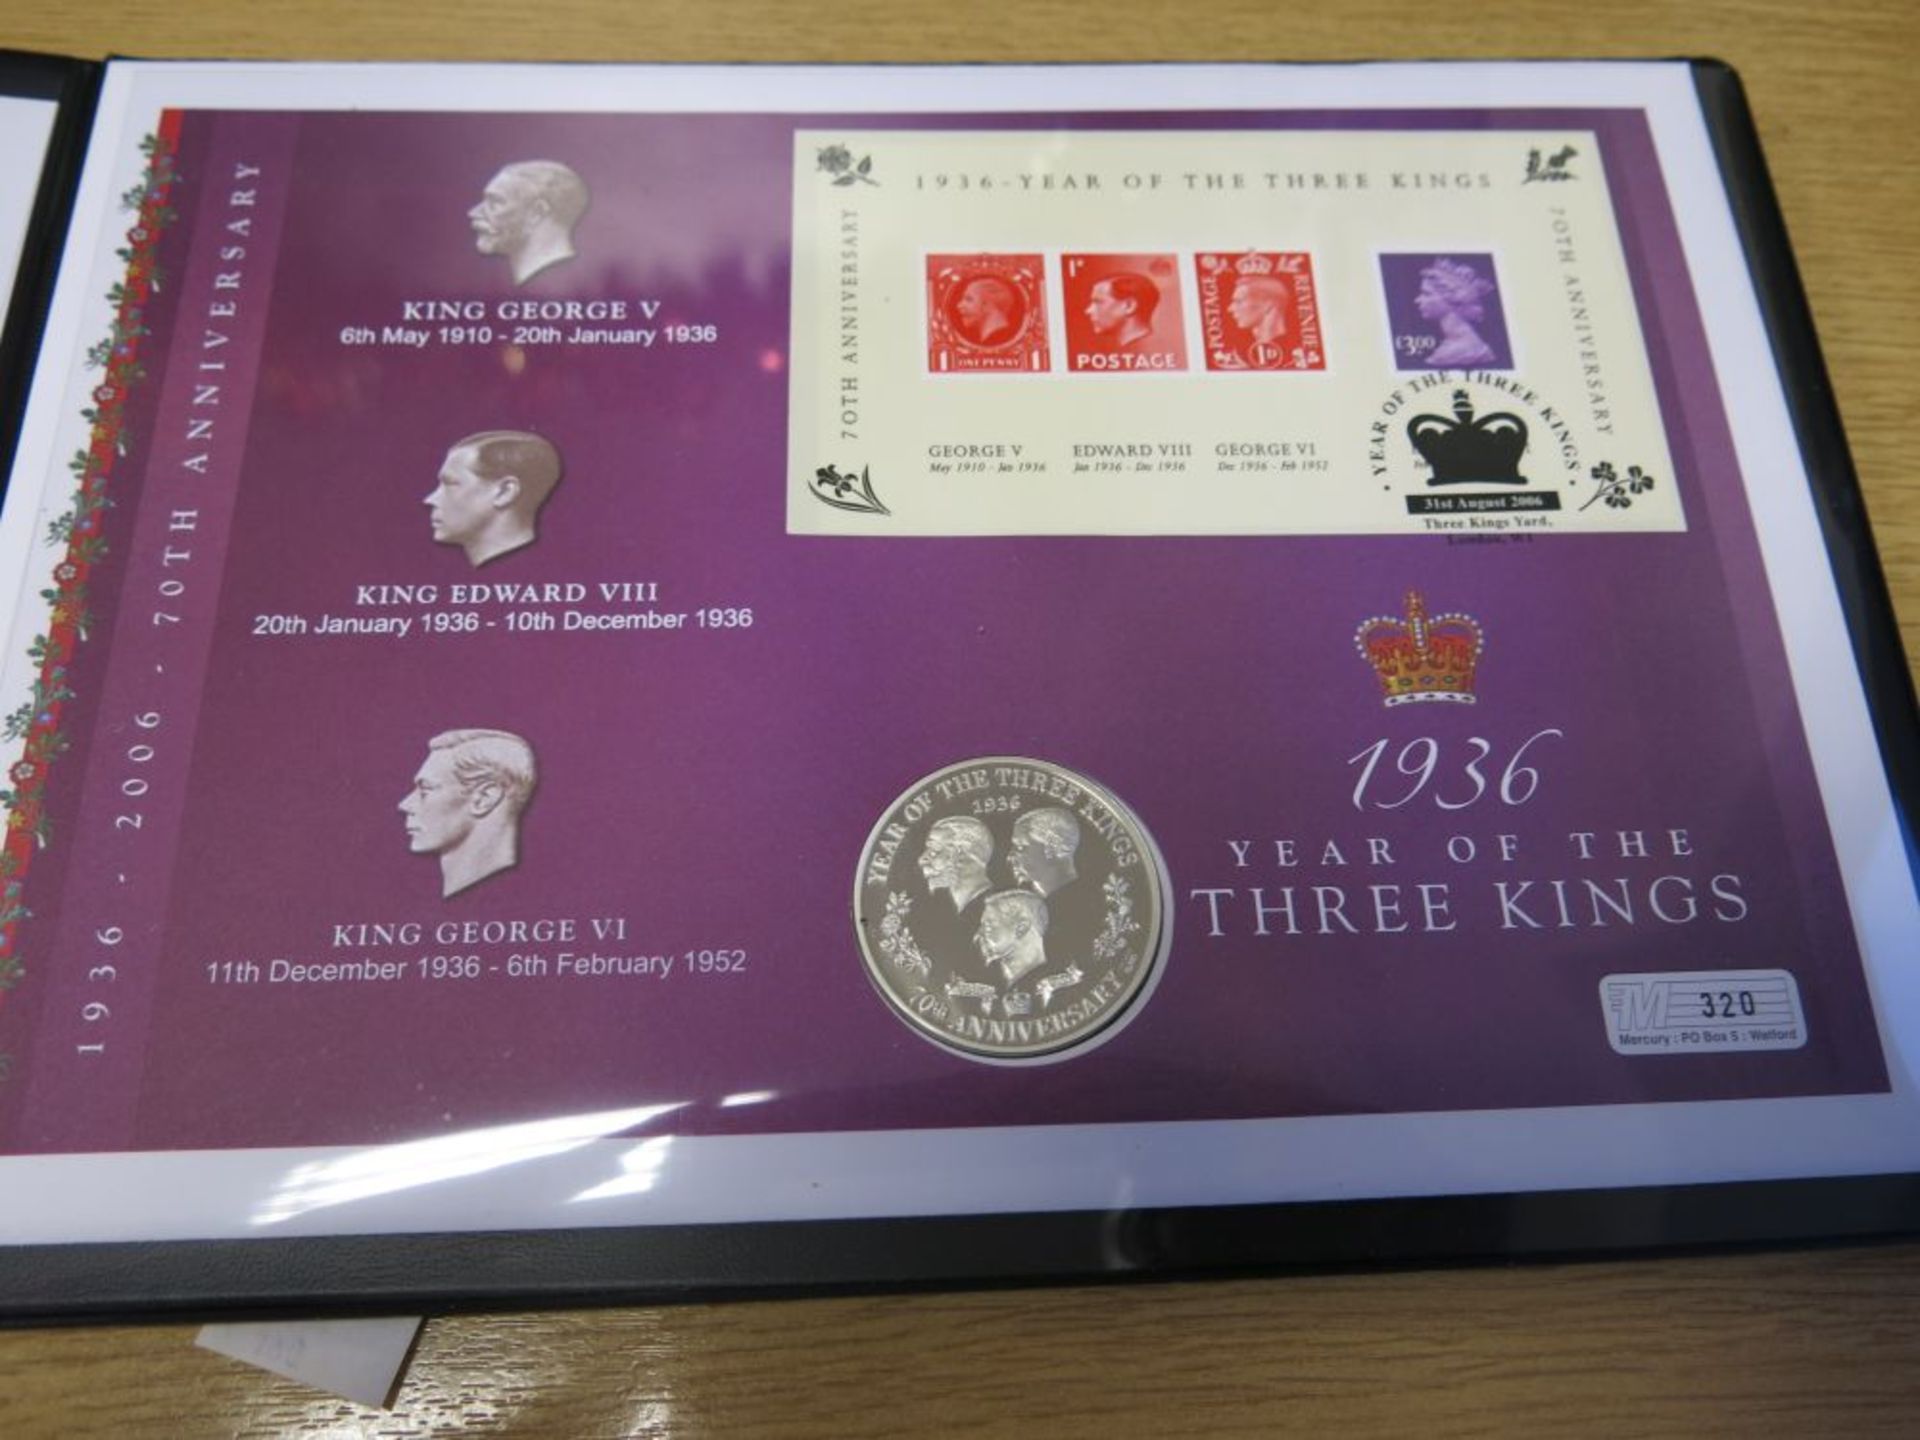 Commemorative Coin Sets - VE Day 60th Anniversary 2005, 'The Three Kings' Coin & First Day Cover, ' - Image 11 of 12